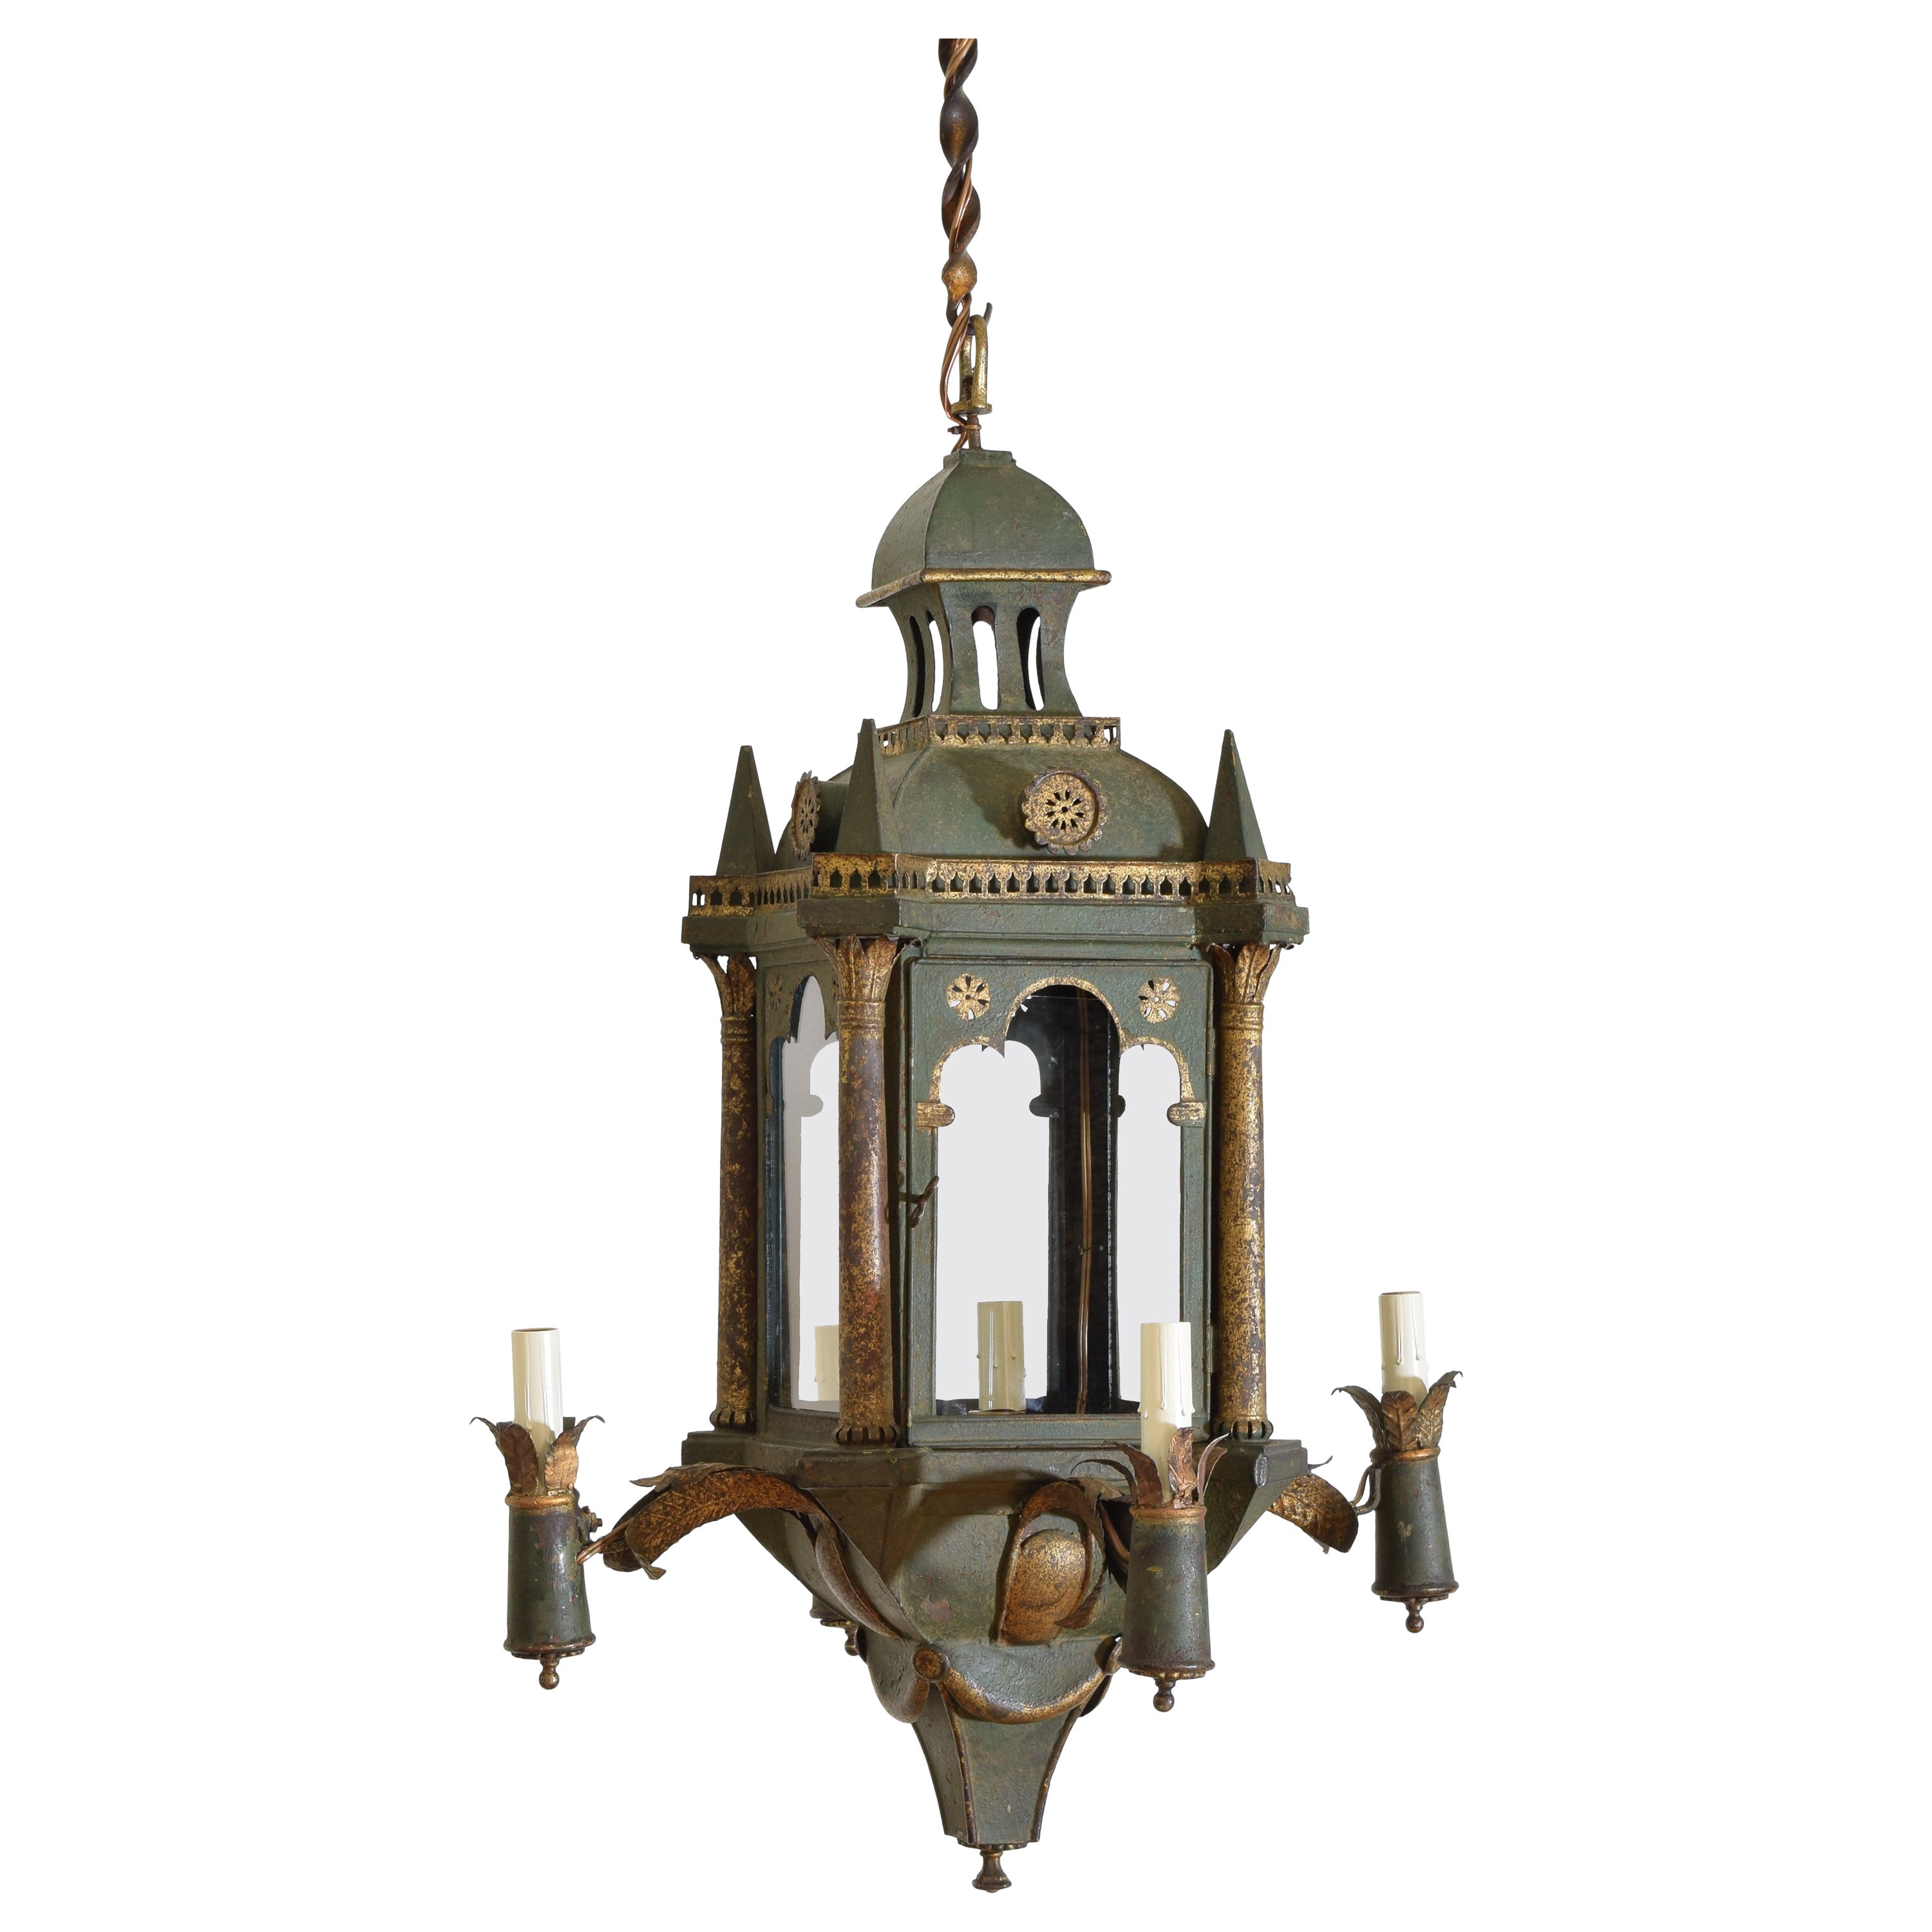 Continental Venetian Inspired Painted & Gilt Tole 5-Light Lantern, early 20thc